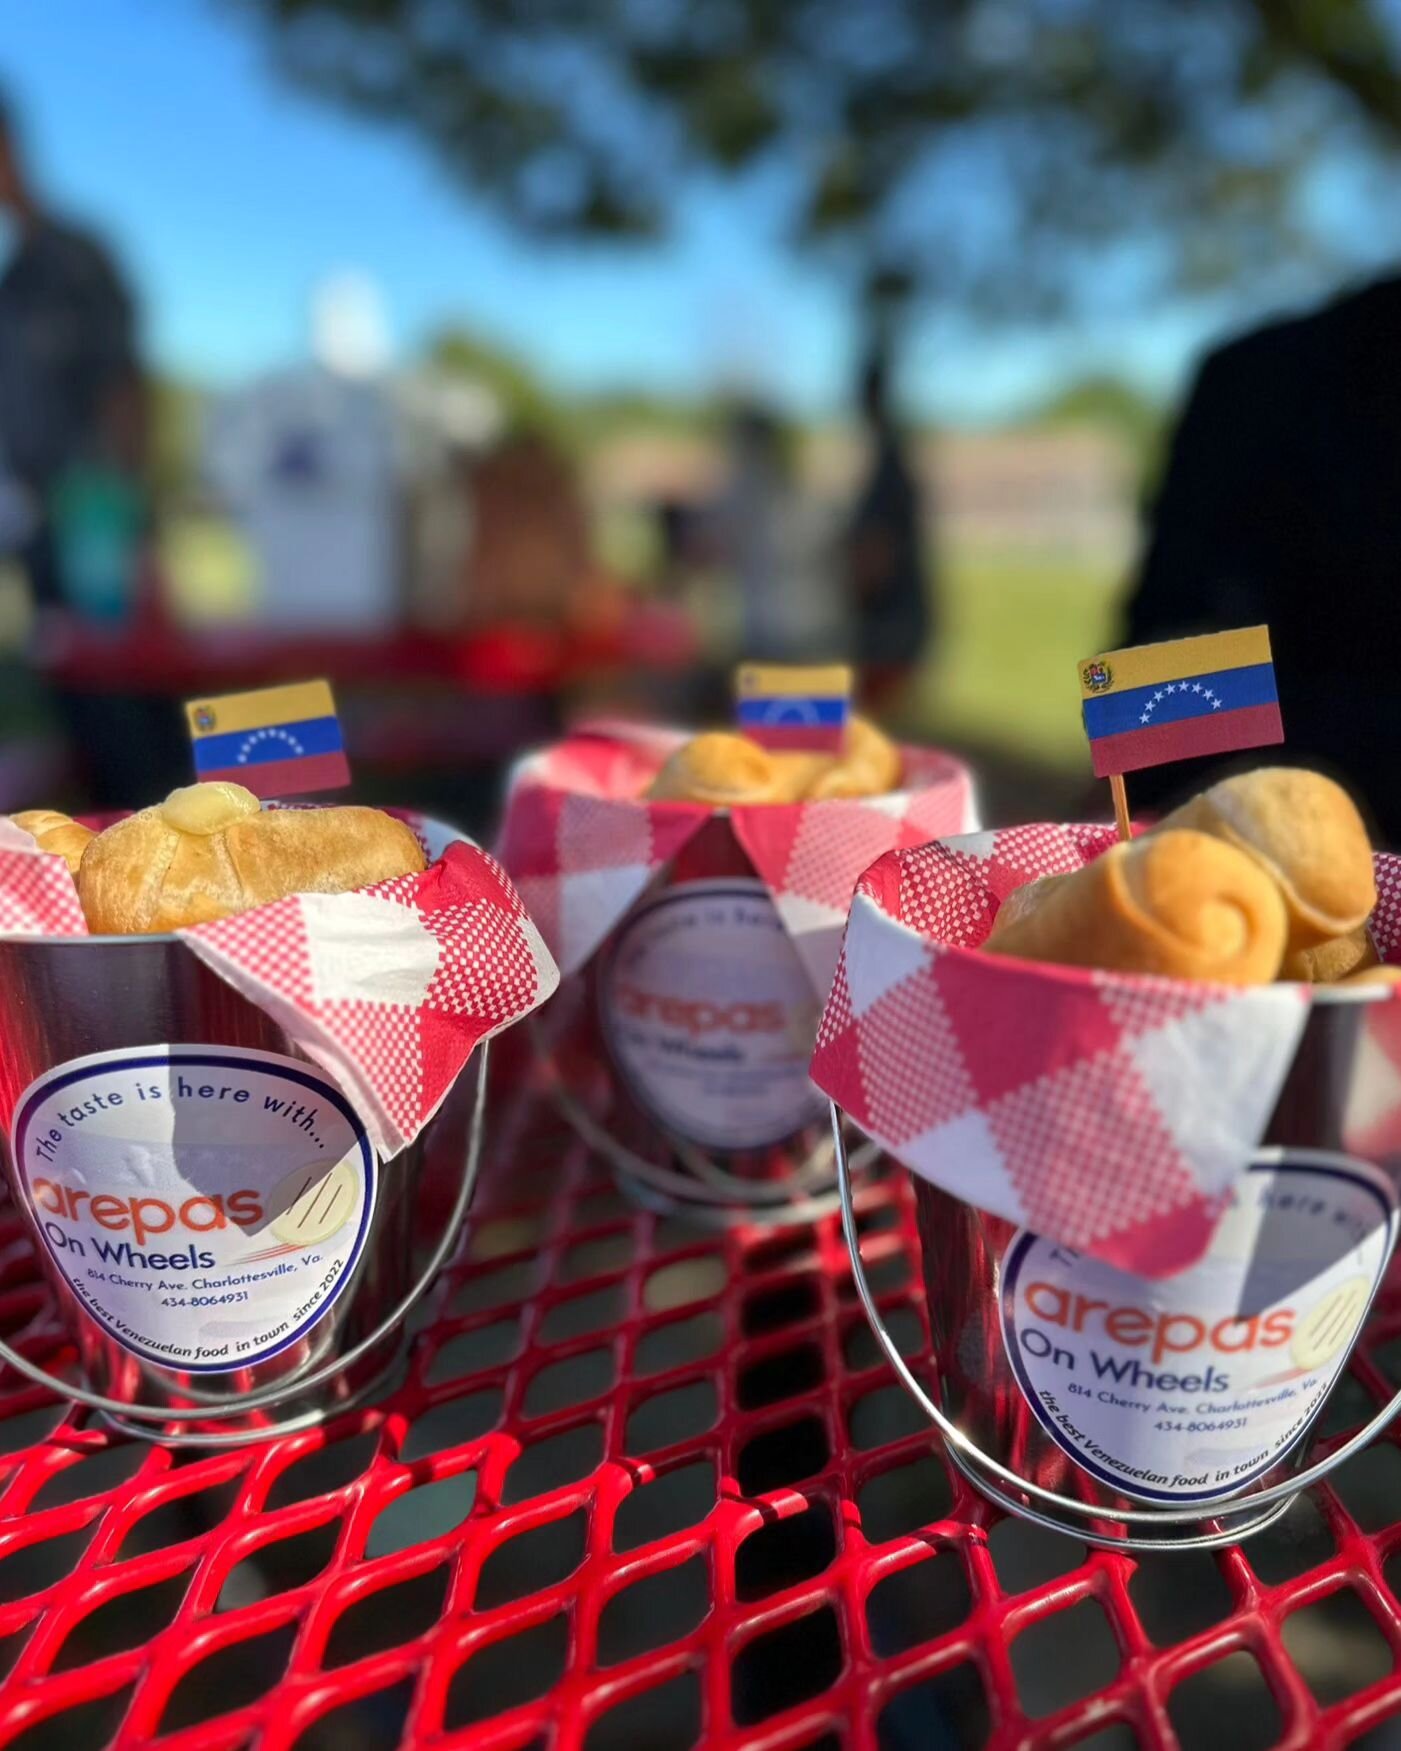 TEQUE&Ntilde;OS! 
Our cheese sticks are the best snack for your Sunday picnic.
.
.
Don't forget we are open today from 10 am to 3 pm in our fixed location at 814 Cherry Ave.
.
.
📸: @lisbethcflores